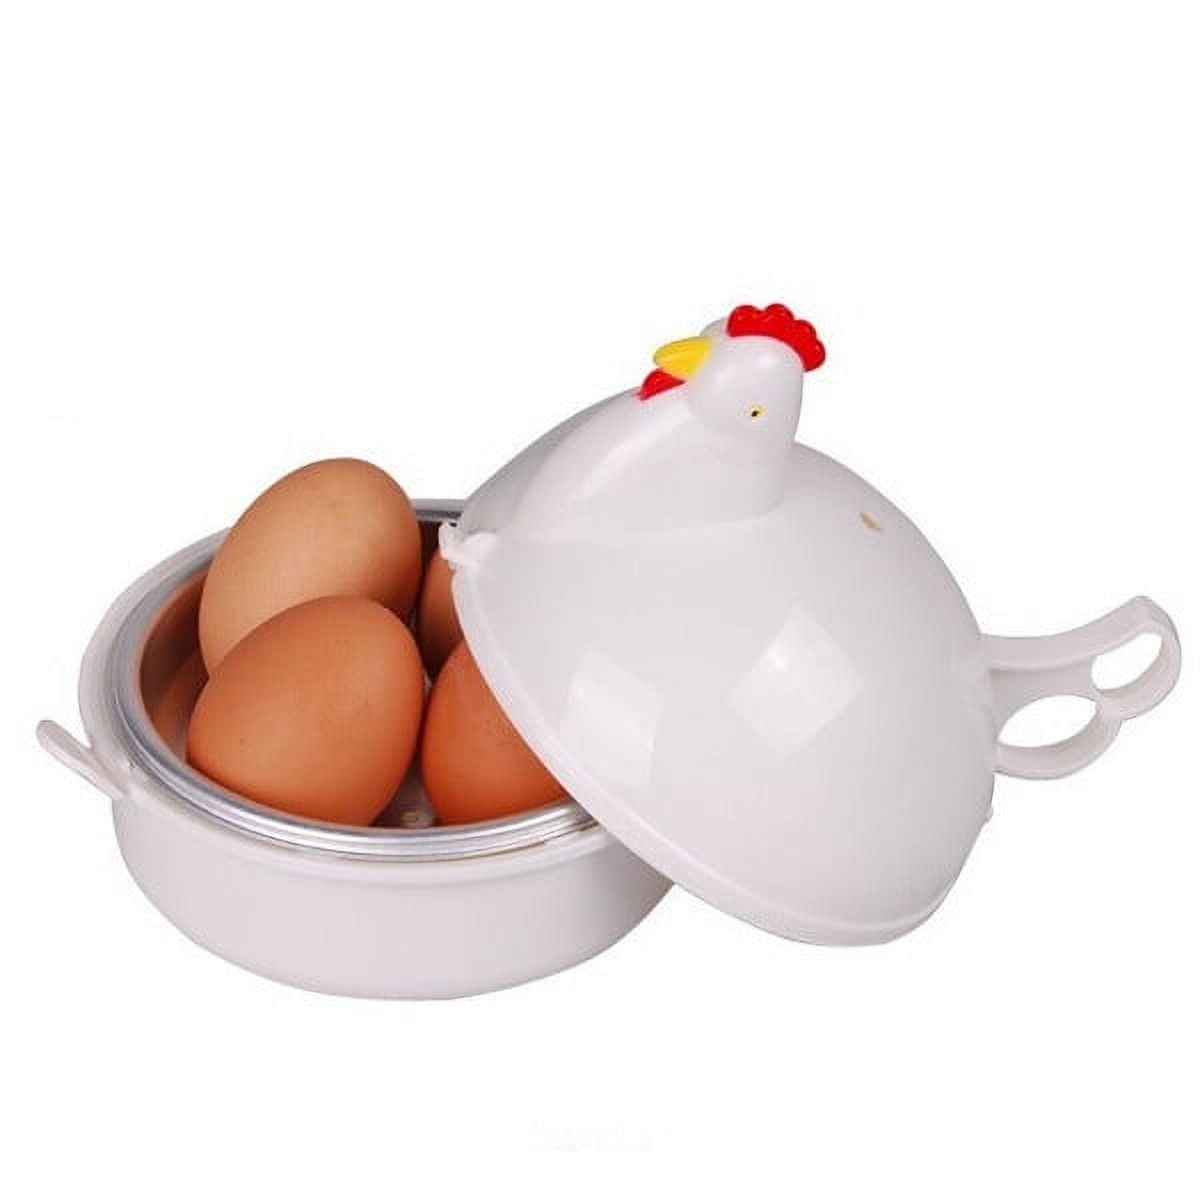 New Fun Chicken Shaped Egg Boiler Steamer Food Grade Plastic 4 Hole Egg  Holder For Kitchen Cooking Tool Accessories - Egg Tools - AliExpress